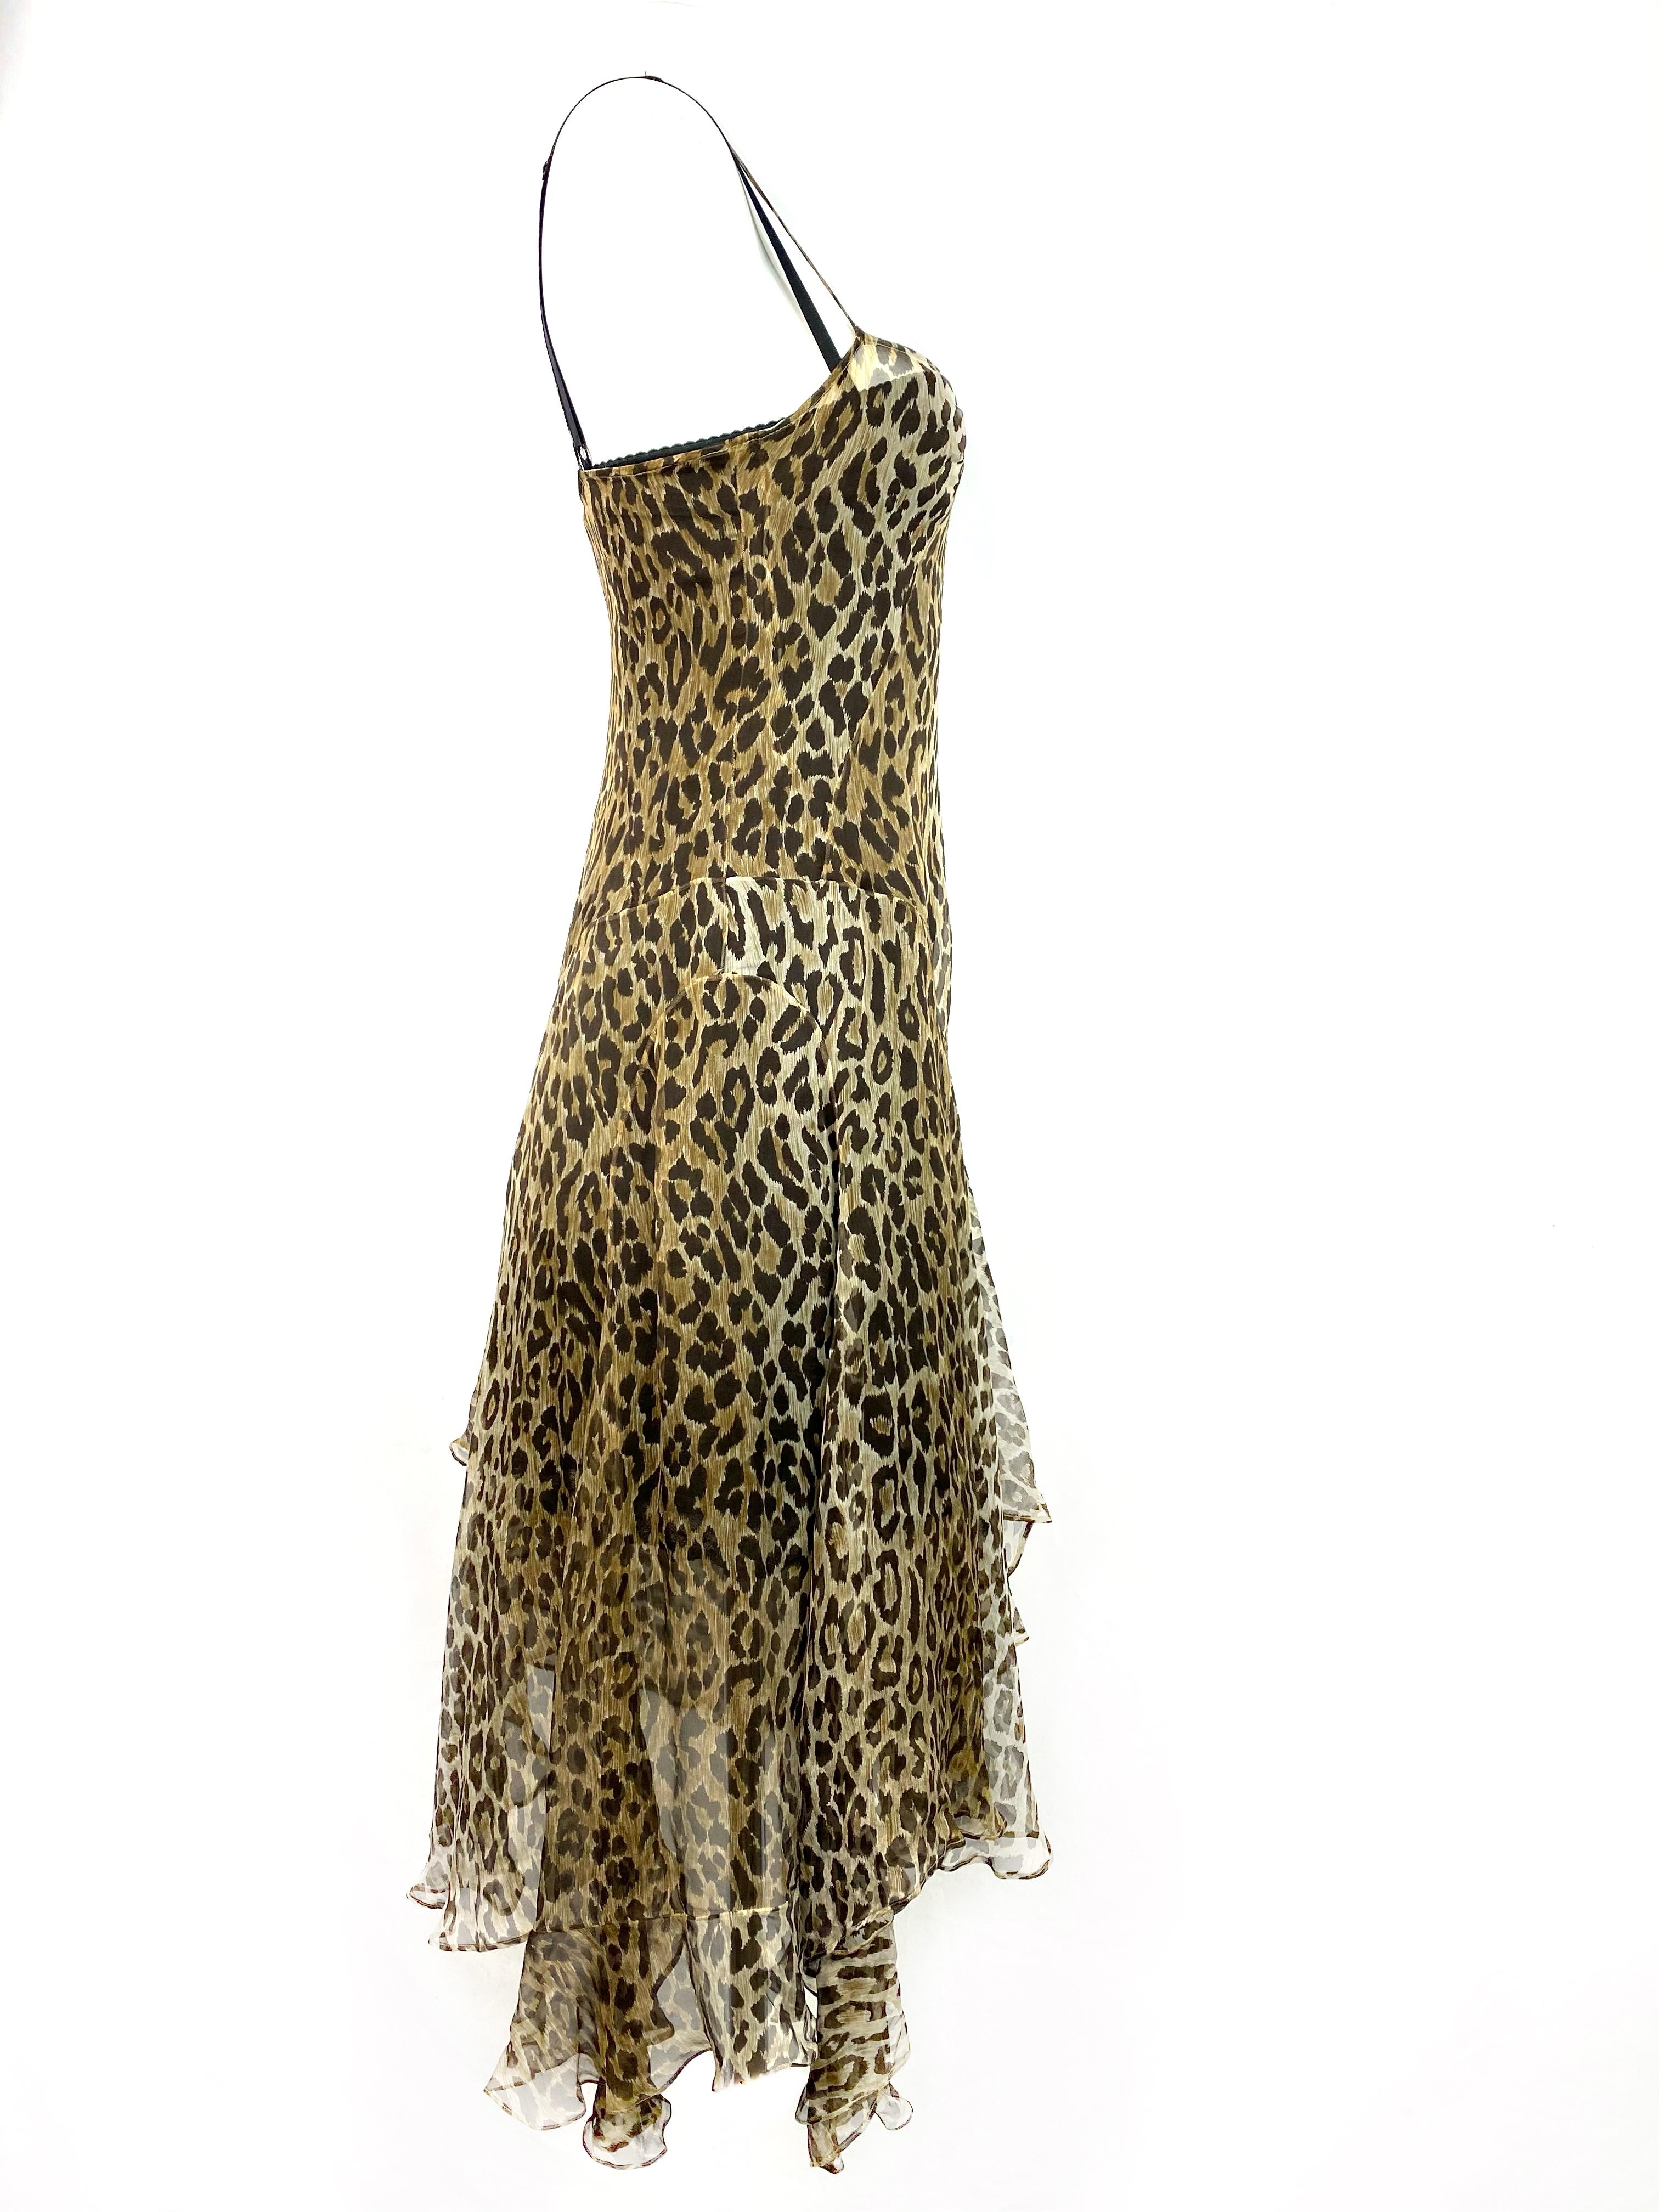 Product details:

Featuring black silk slip underdress with lace detail, leopard print , spaghetti strap, mid length, light weigh fabric.